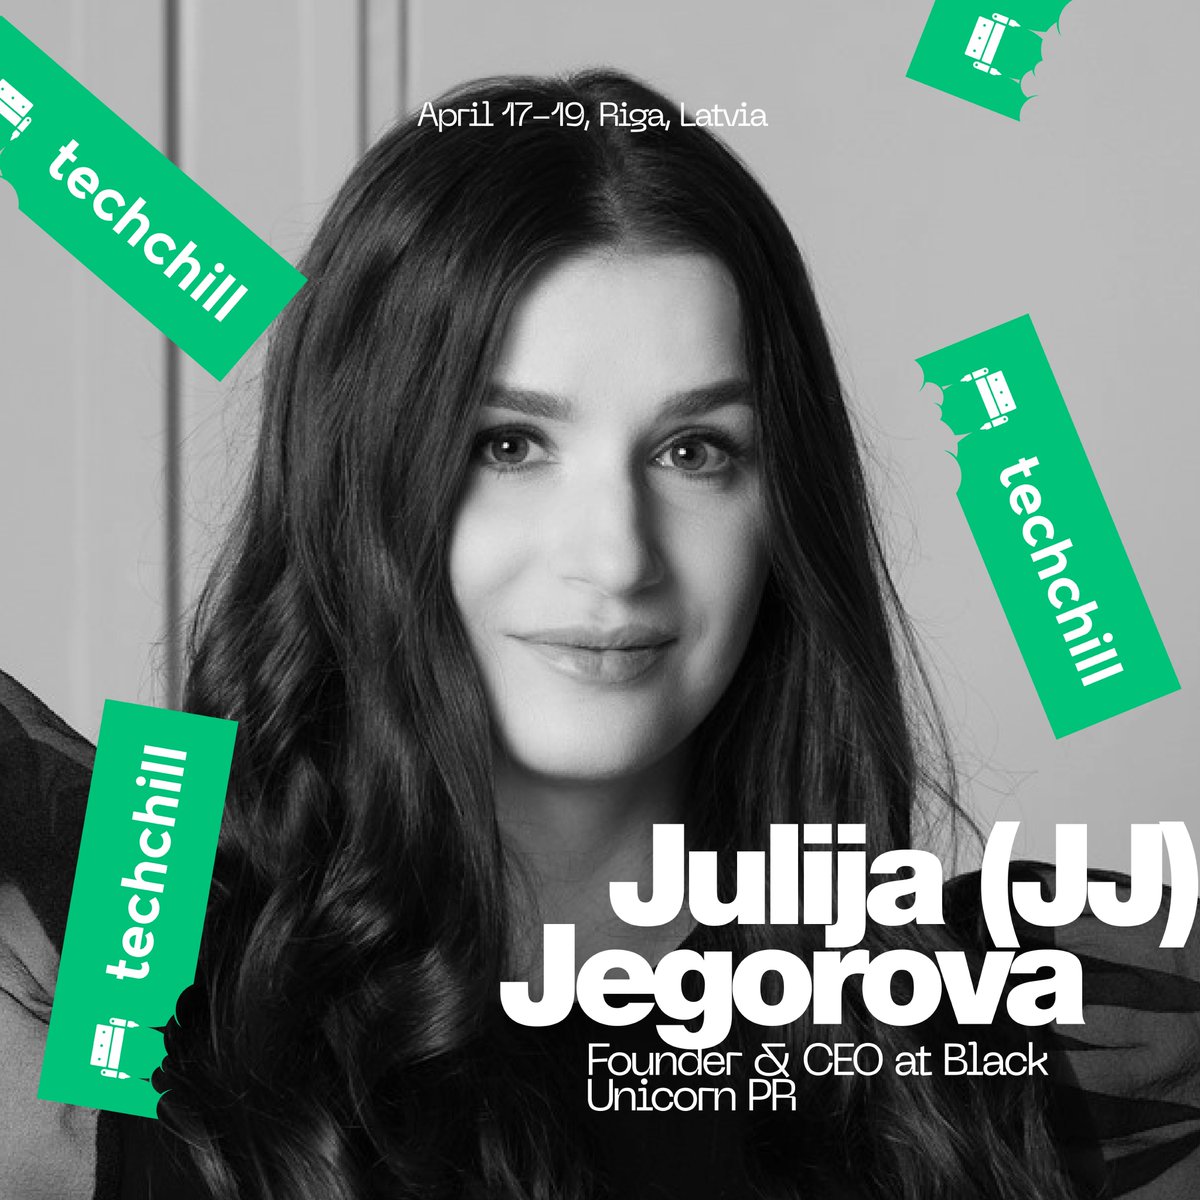 Join us in welcoming @ju_jegorova, founder and CEO of @BlackUnicornPR! With 14 years of PR and communications expertise, Julija empowers startup founders with personalized strategies. techchill.co/get-pass